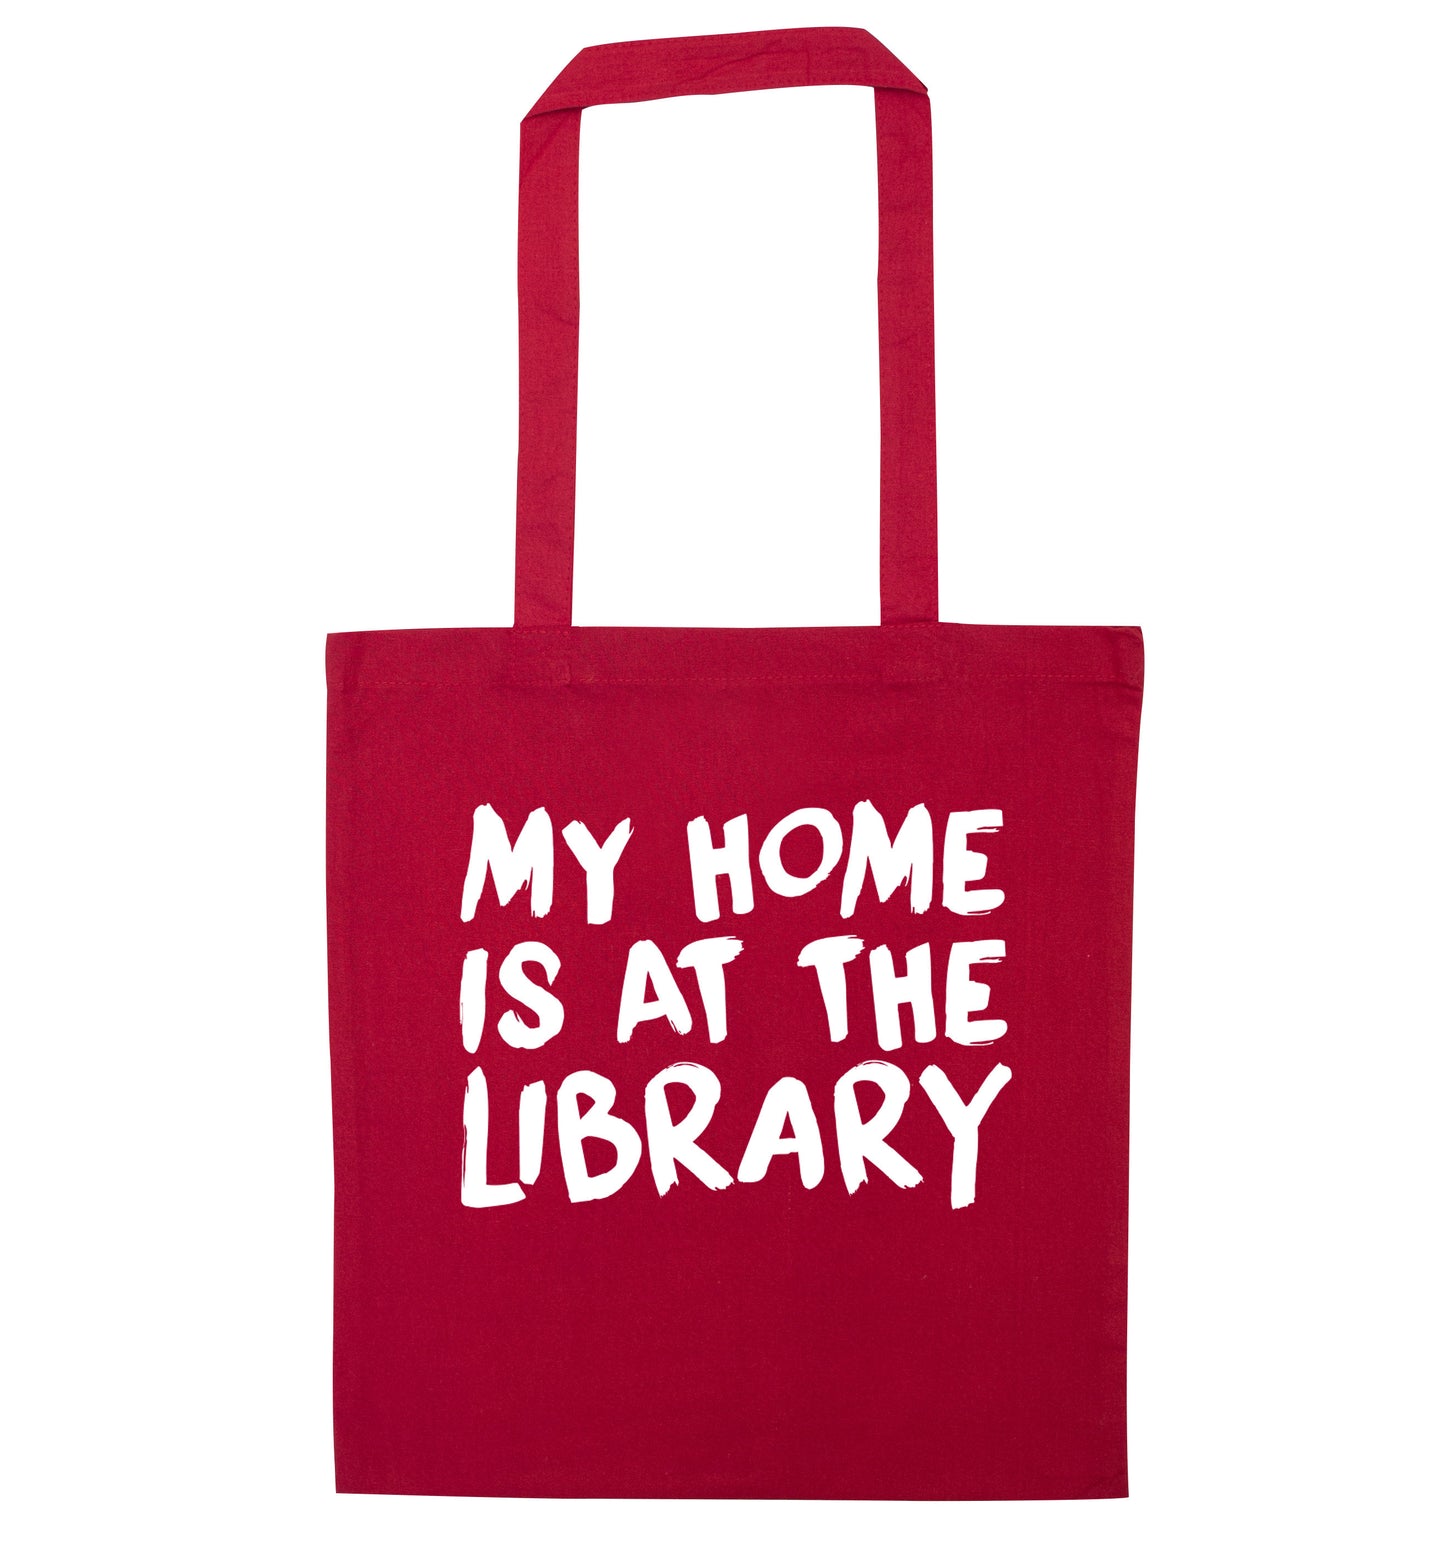 My home is at the library red tote bag